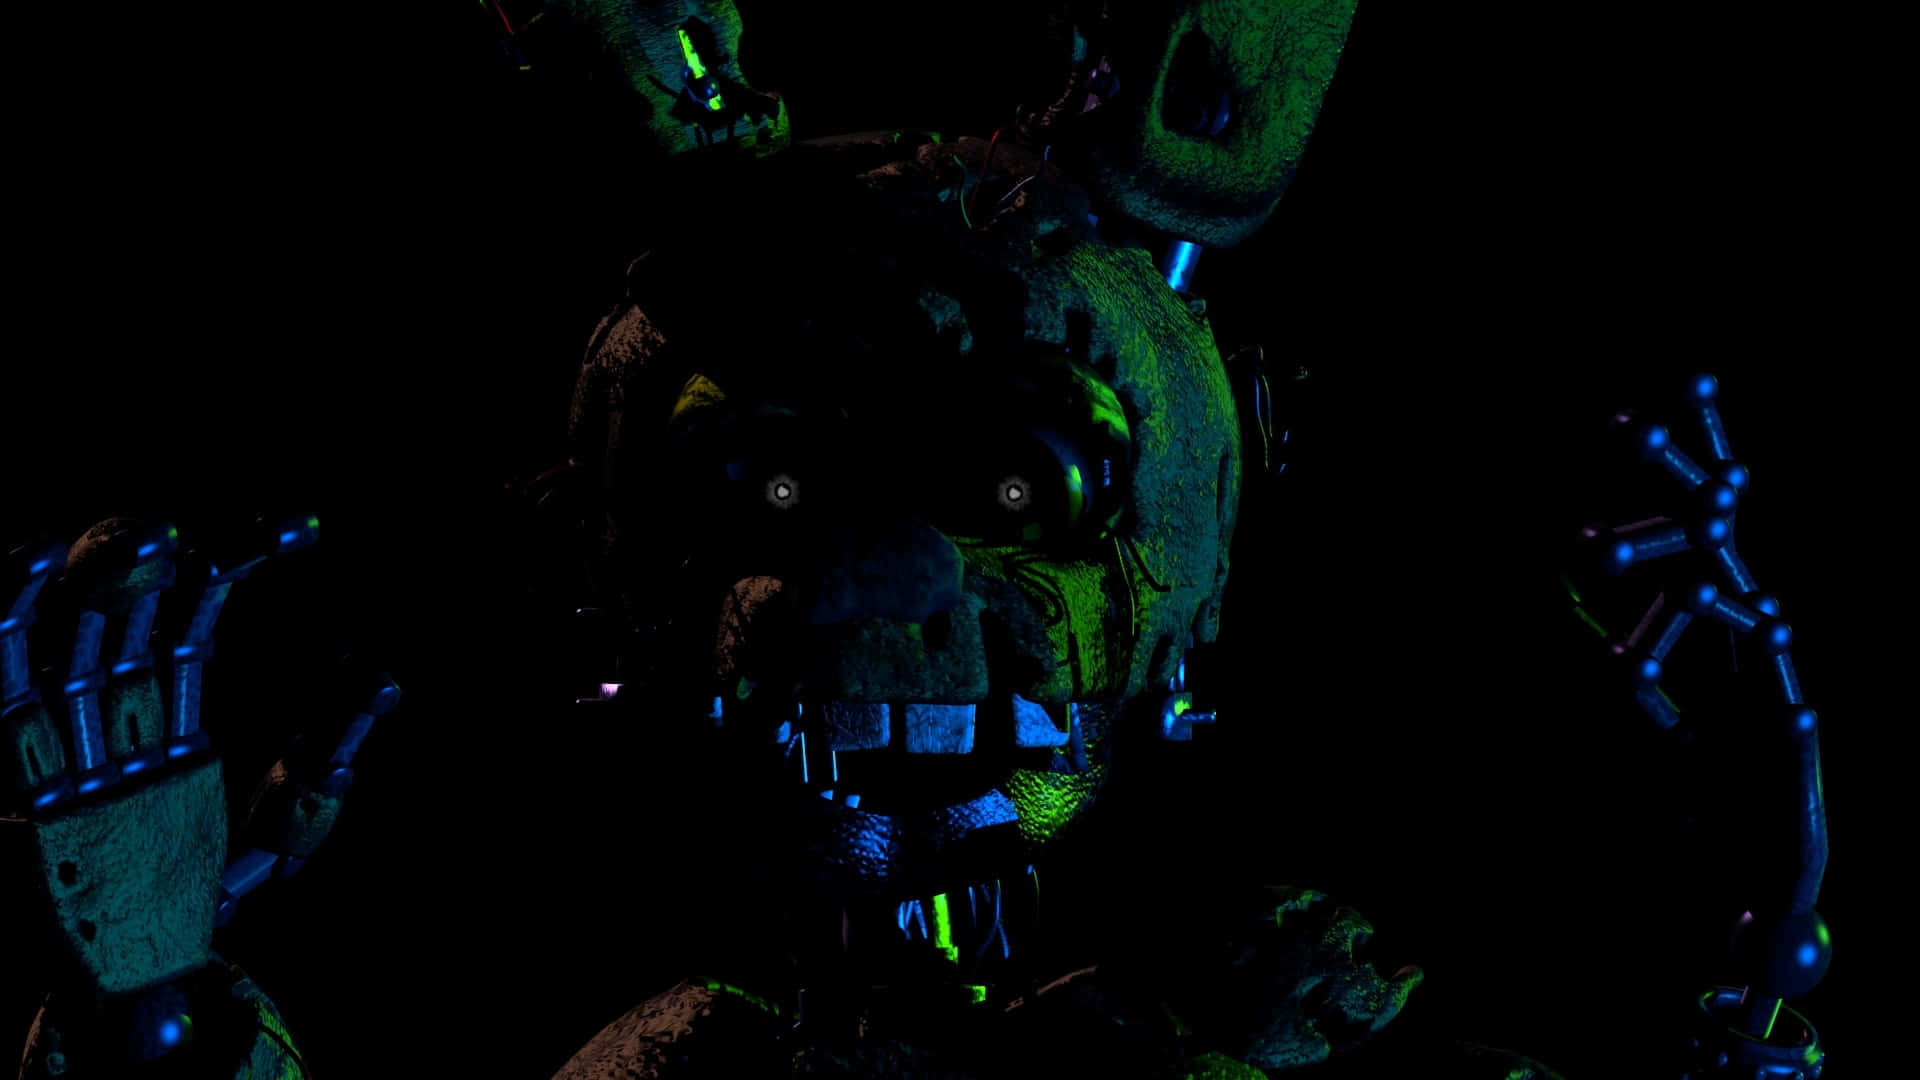 Thrilling Springtrap Image: The Ultimate Game Character Wallpaper